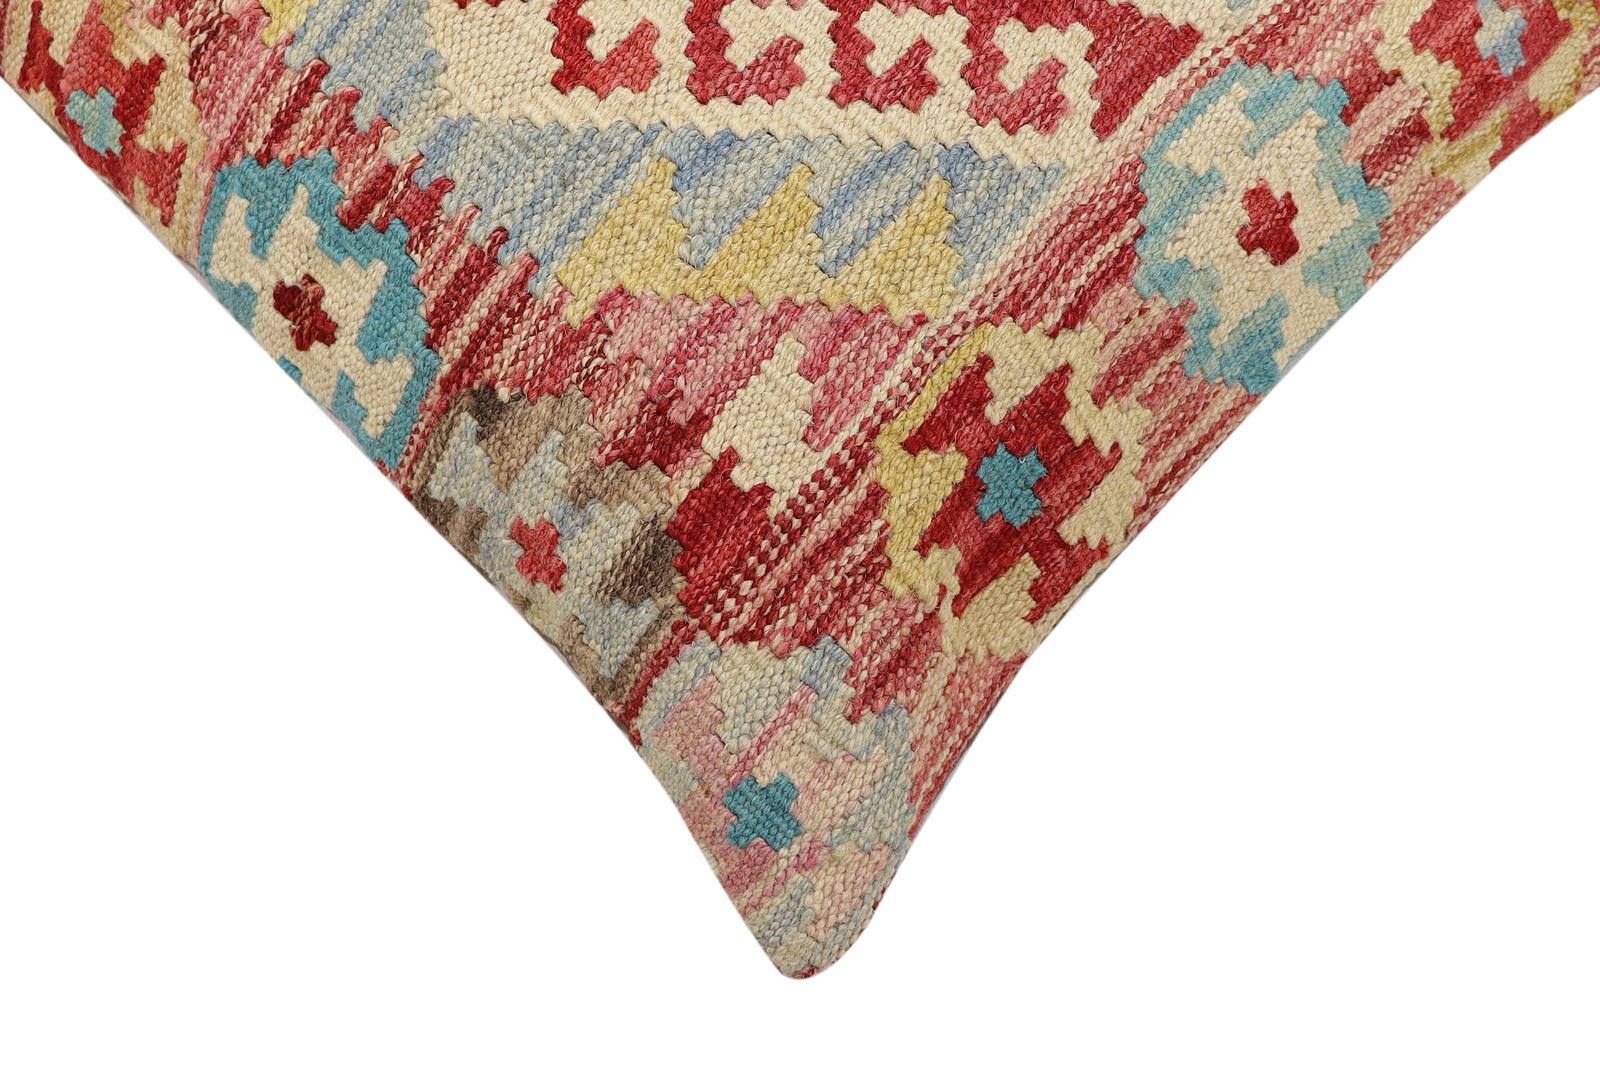 handmade Traditional Pillow Red Beige Hand-Woven SQUARE 100% WOOL Hand woven turkish pillow2' x 2'